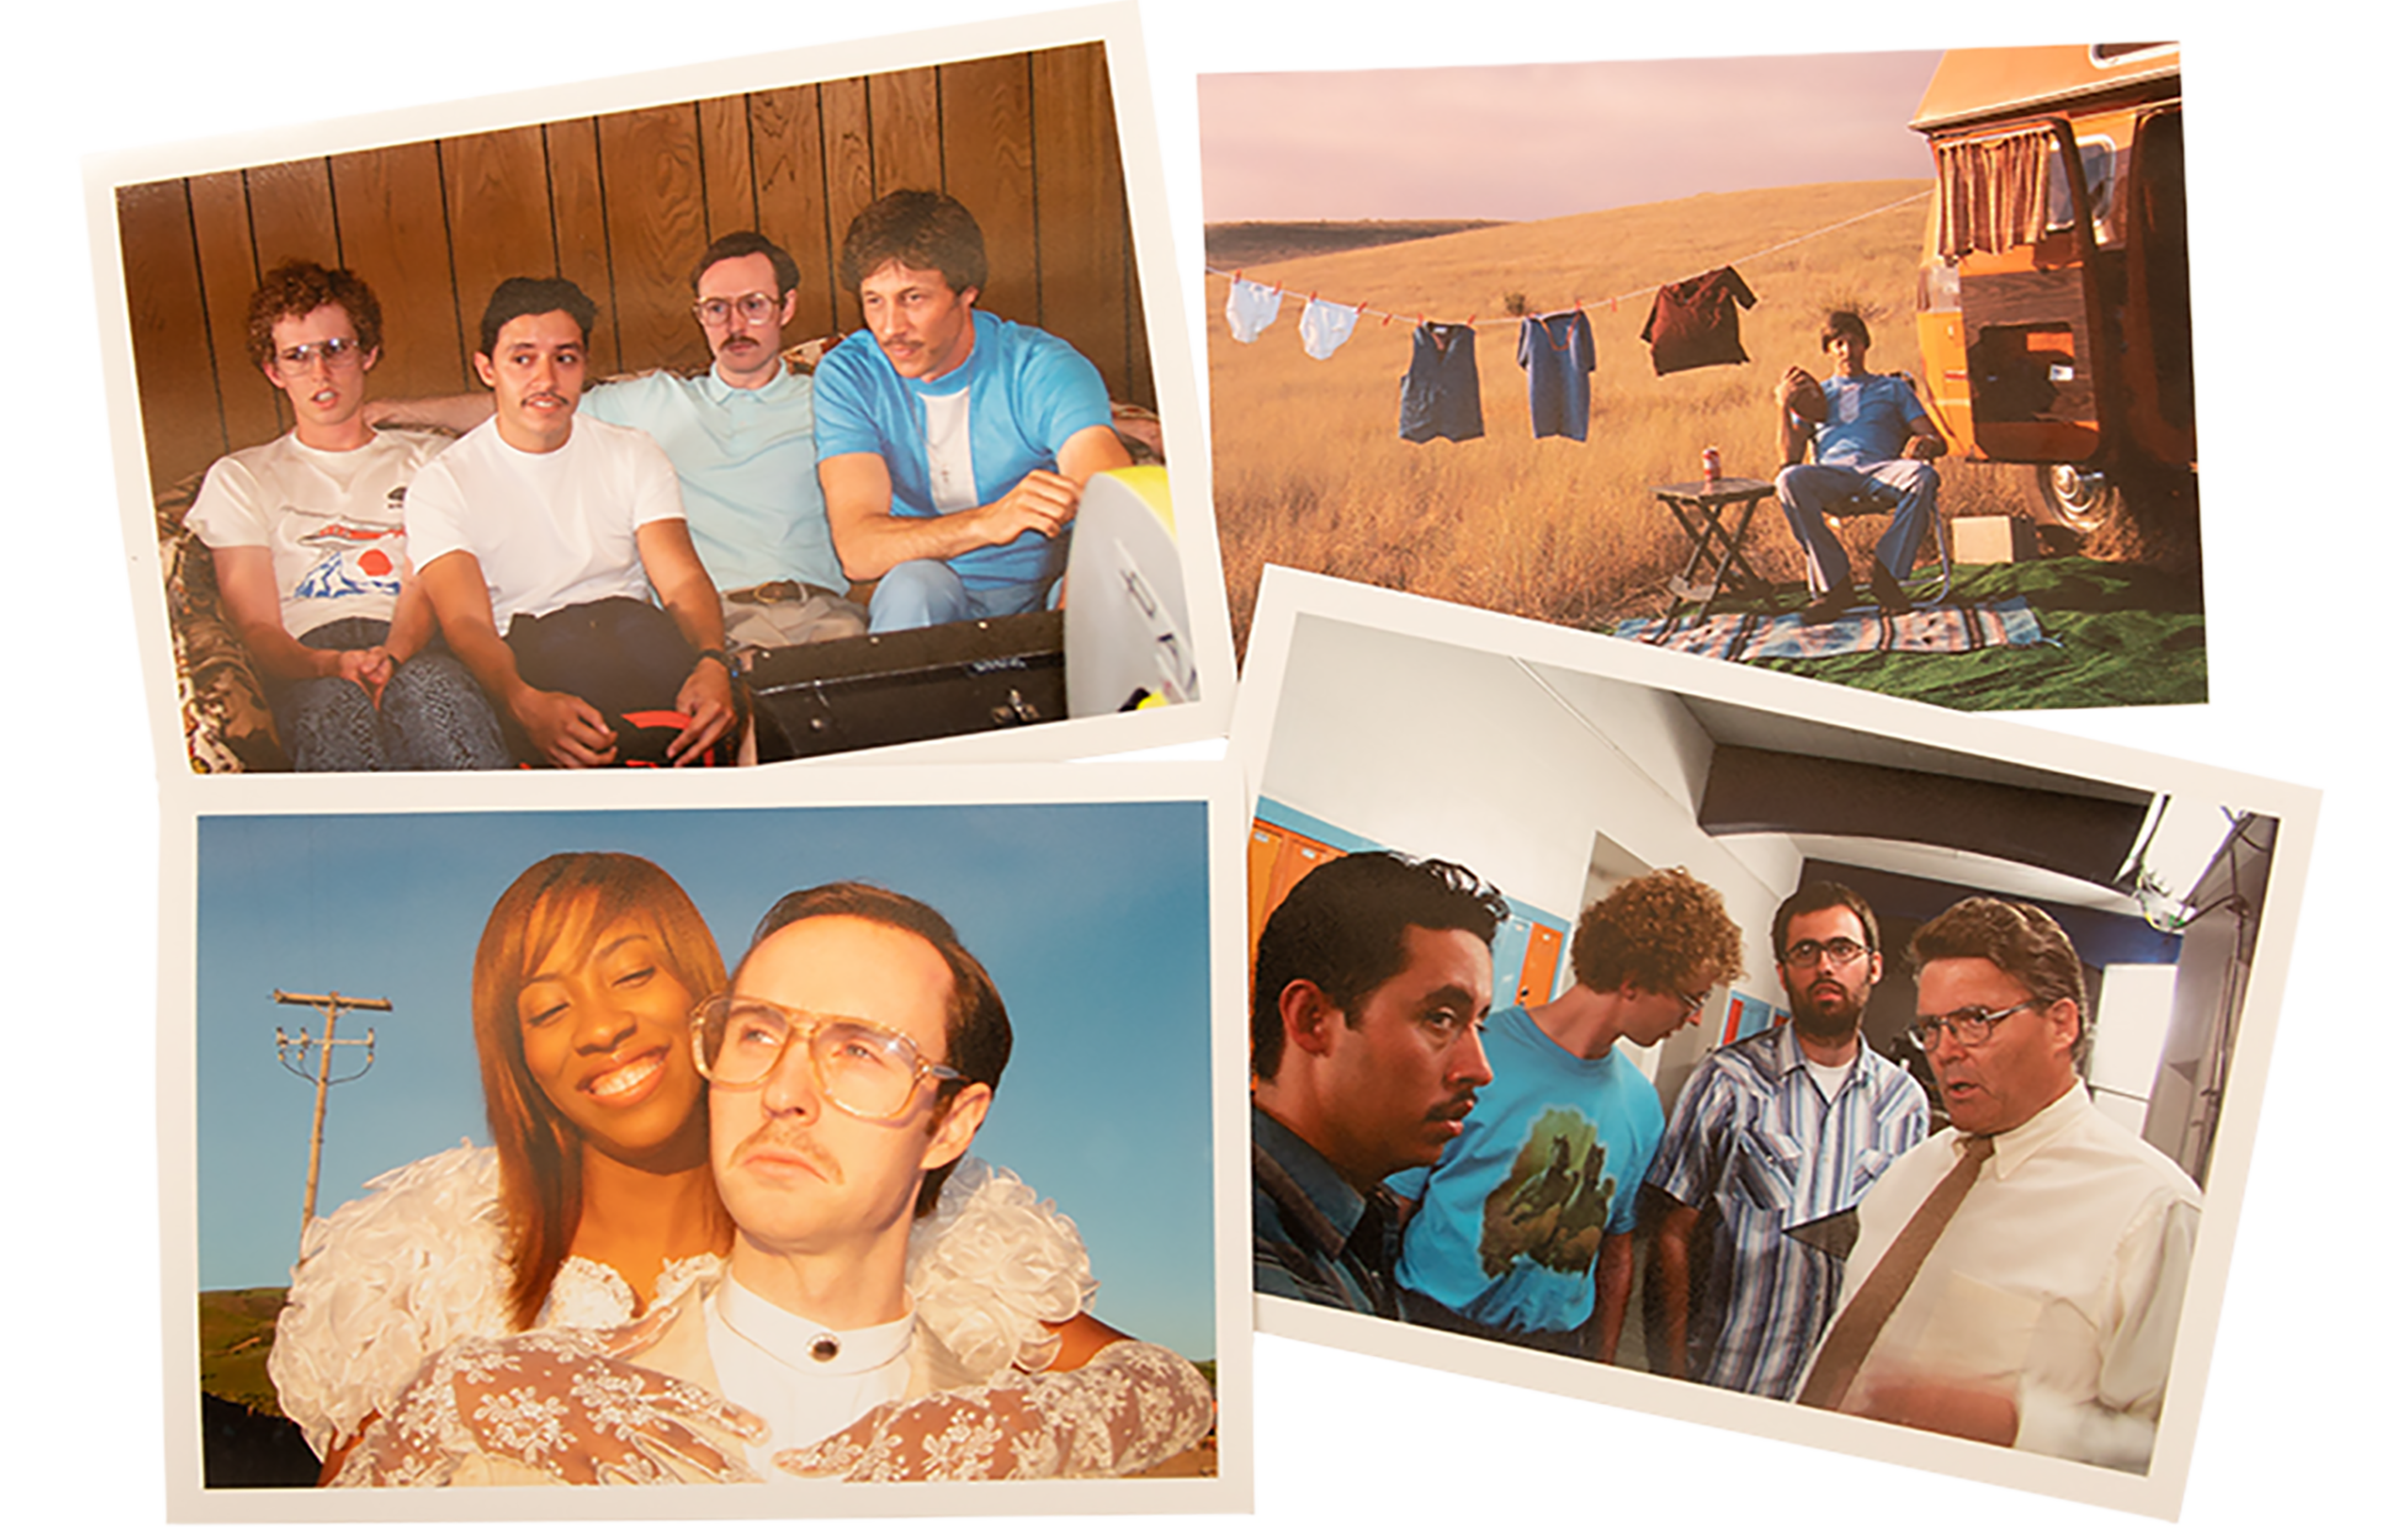 Four photos laid out together. One features Napoleon, Pedro, Kip, and Uncle Rico sitting on a couch. Another shows Uncle Rico sitting by his van in a corn field. Another photo shows LaFawnduh and Kip, snapped at the filming of the bonus wedding scene at the end of the film. The final photo shows Pedro, Napoleon, director Jared Hess, and the principal, played by BYU professor Tom Lefler.